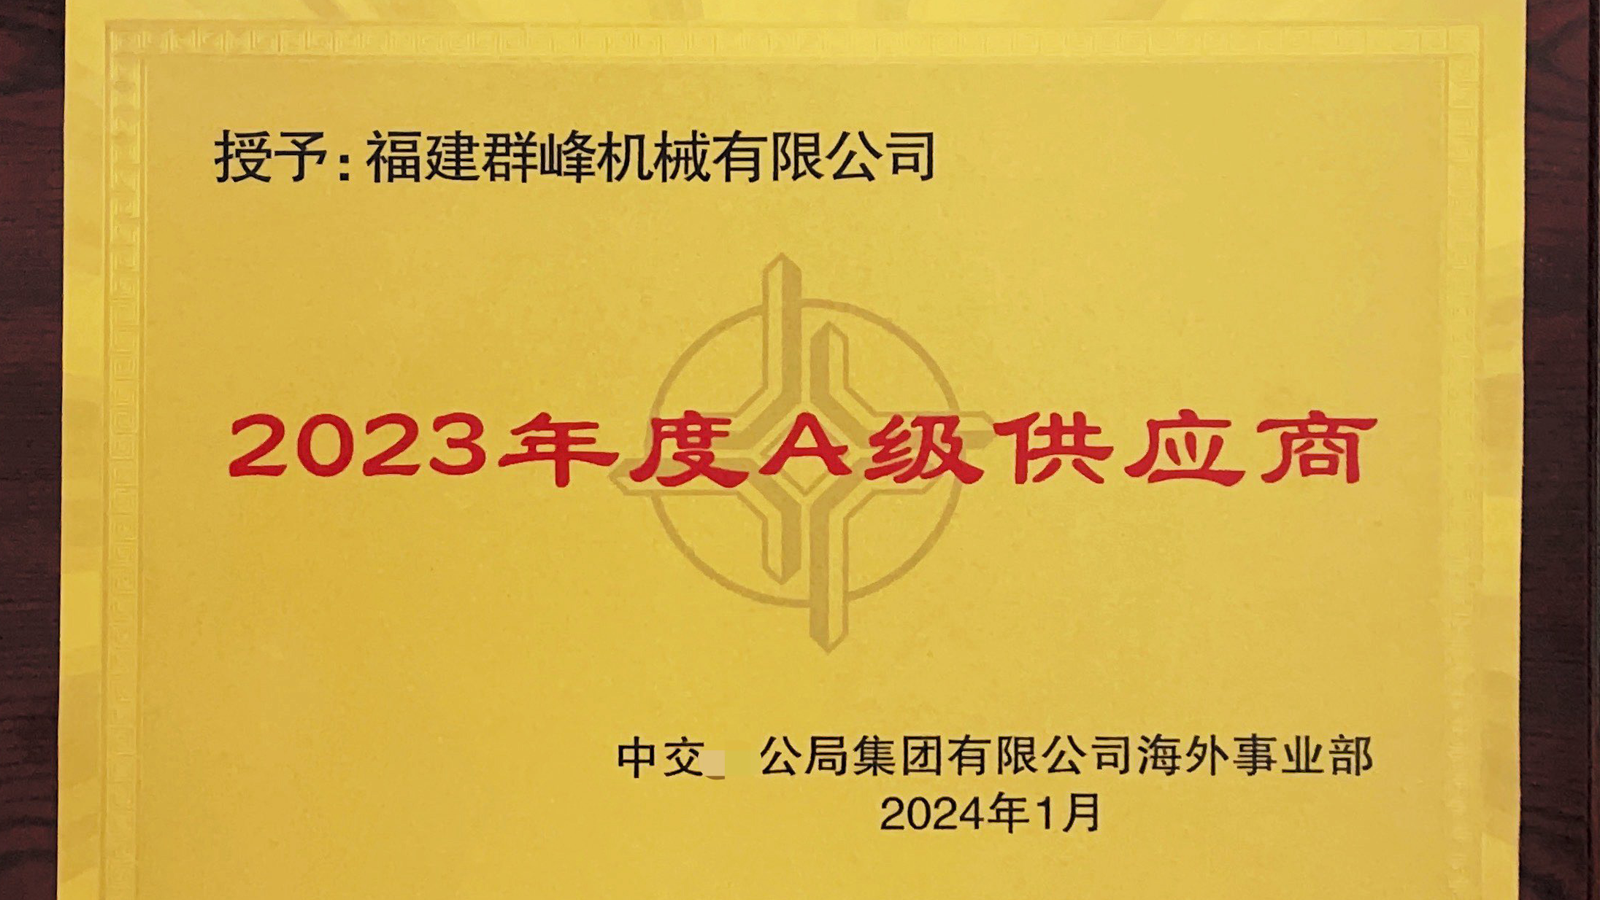 Qunfeng Machinery was awarded the title of "A-level Supplier of 2023" by a central enterprise.